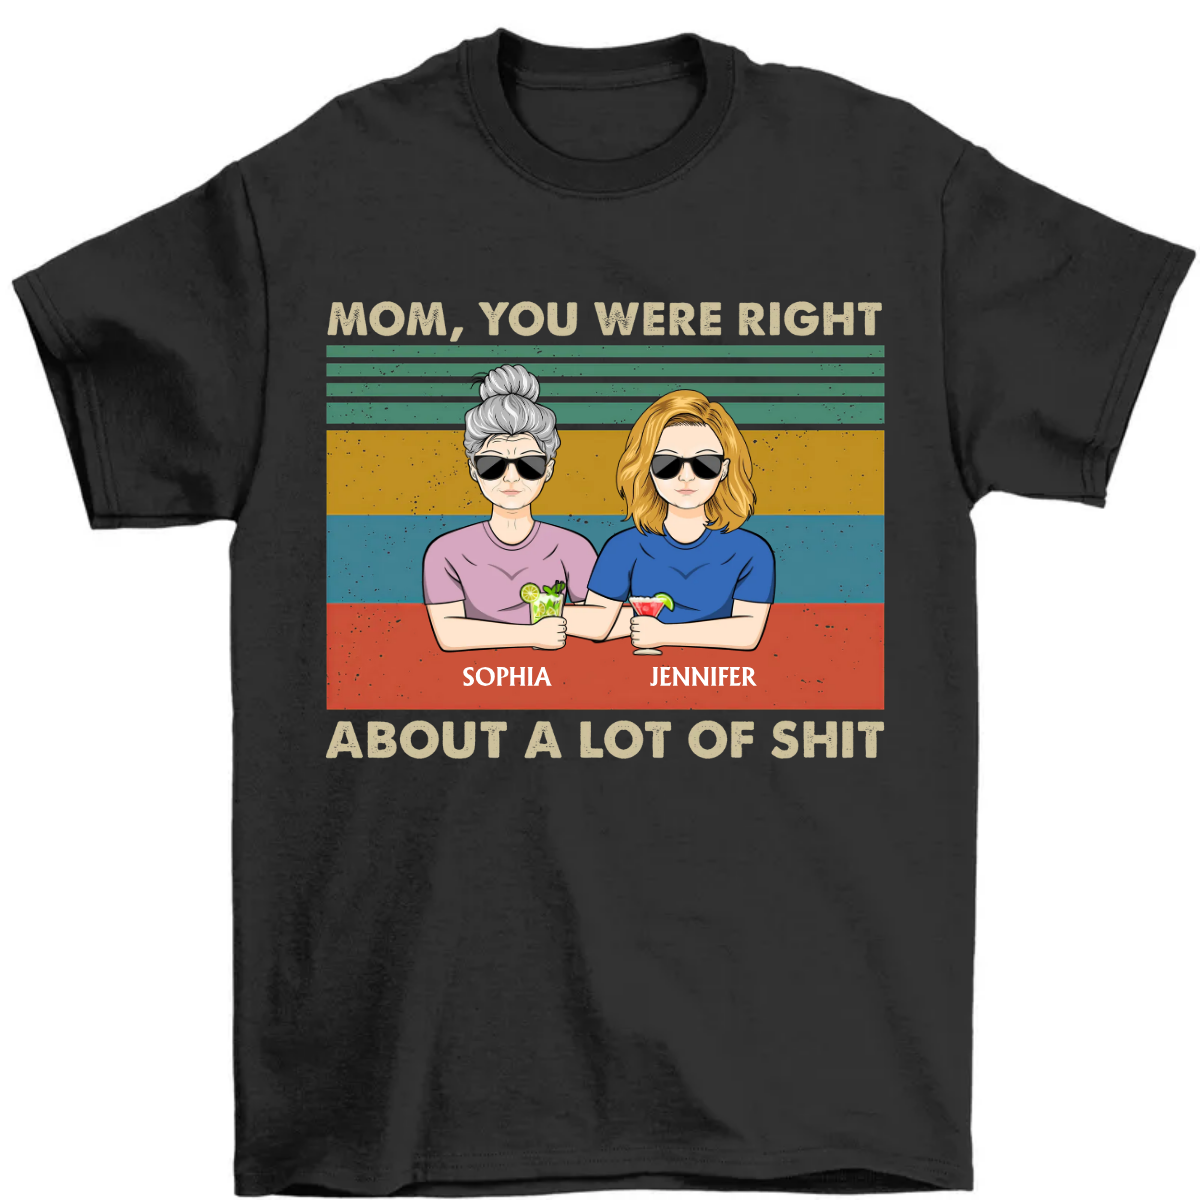 Mom, You Were Right - Funny Gift For Mom, Mother, Grandma - Personalized T Shirt